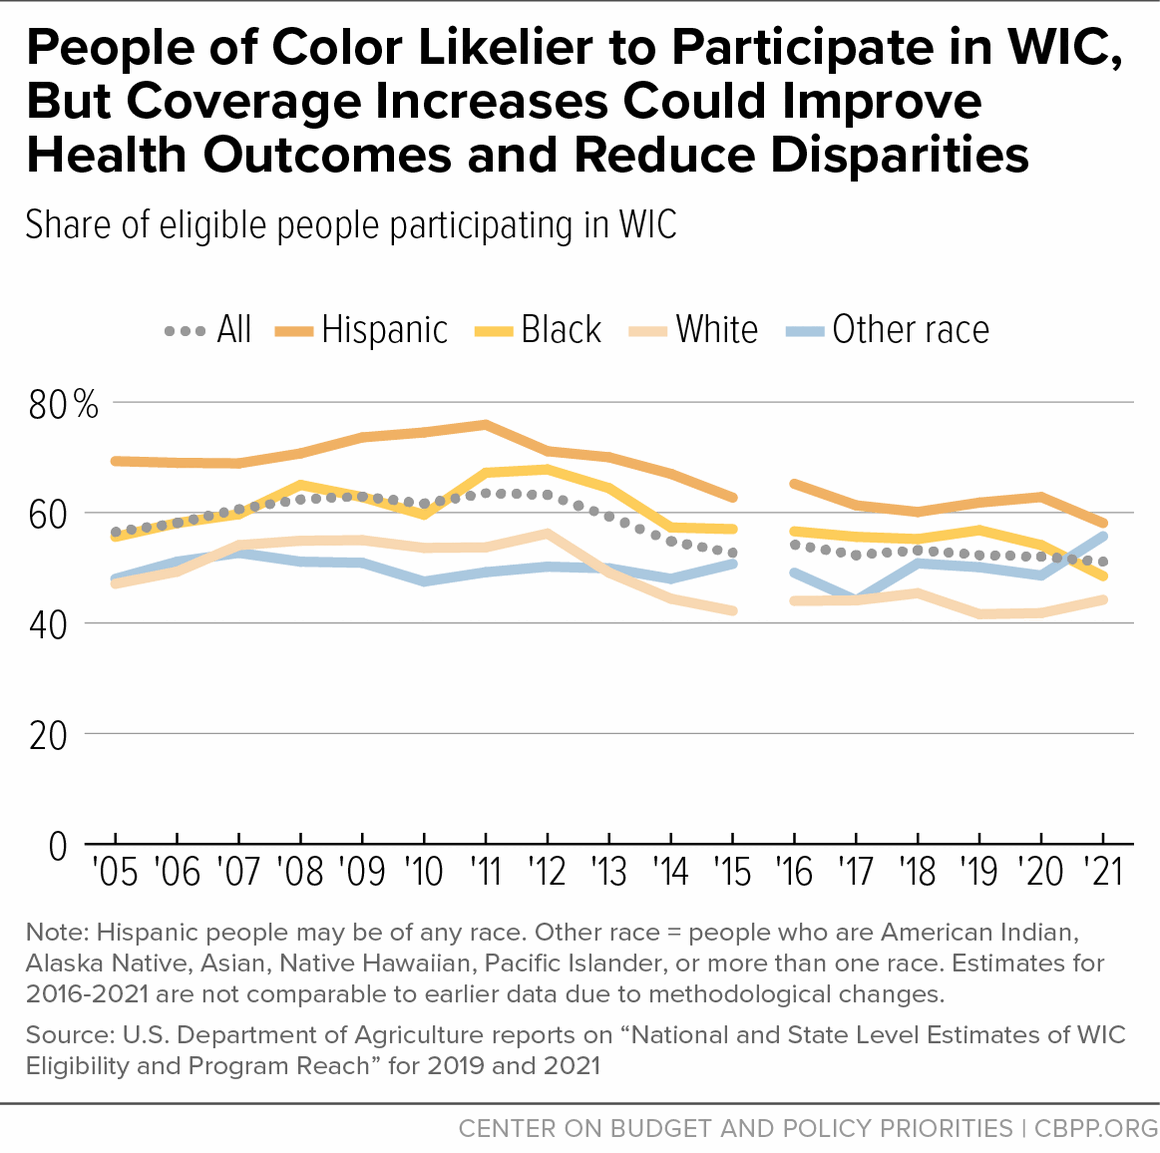 People of Color Likelier to Participate in WIC, But Coverage Increases Could Improve Health Outcomes and Reduce Disparities